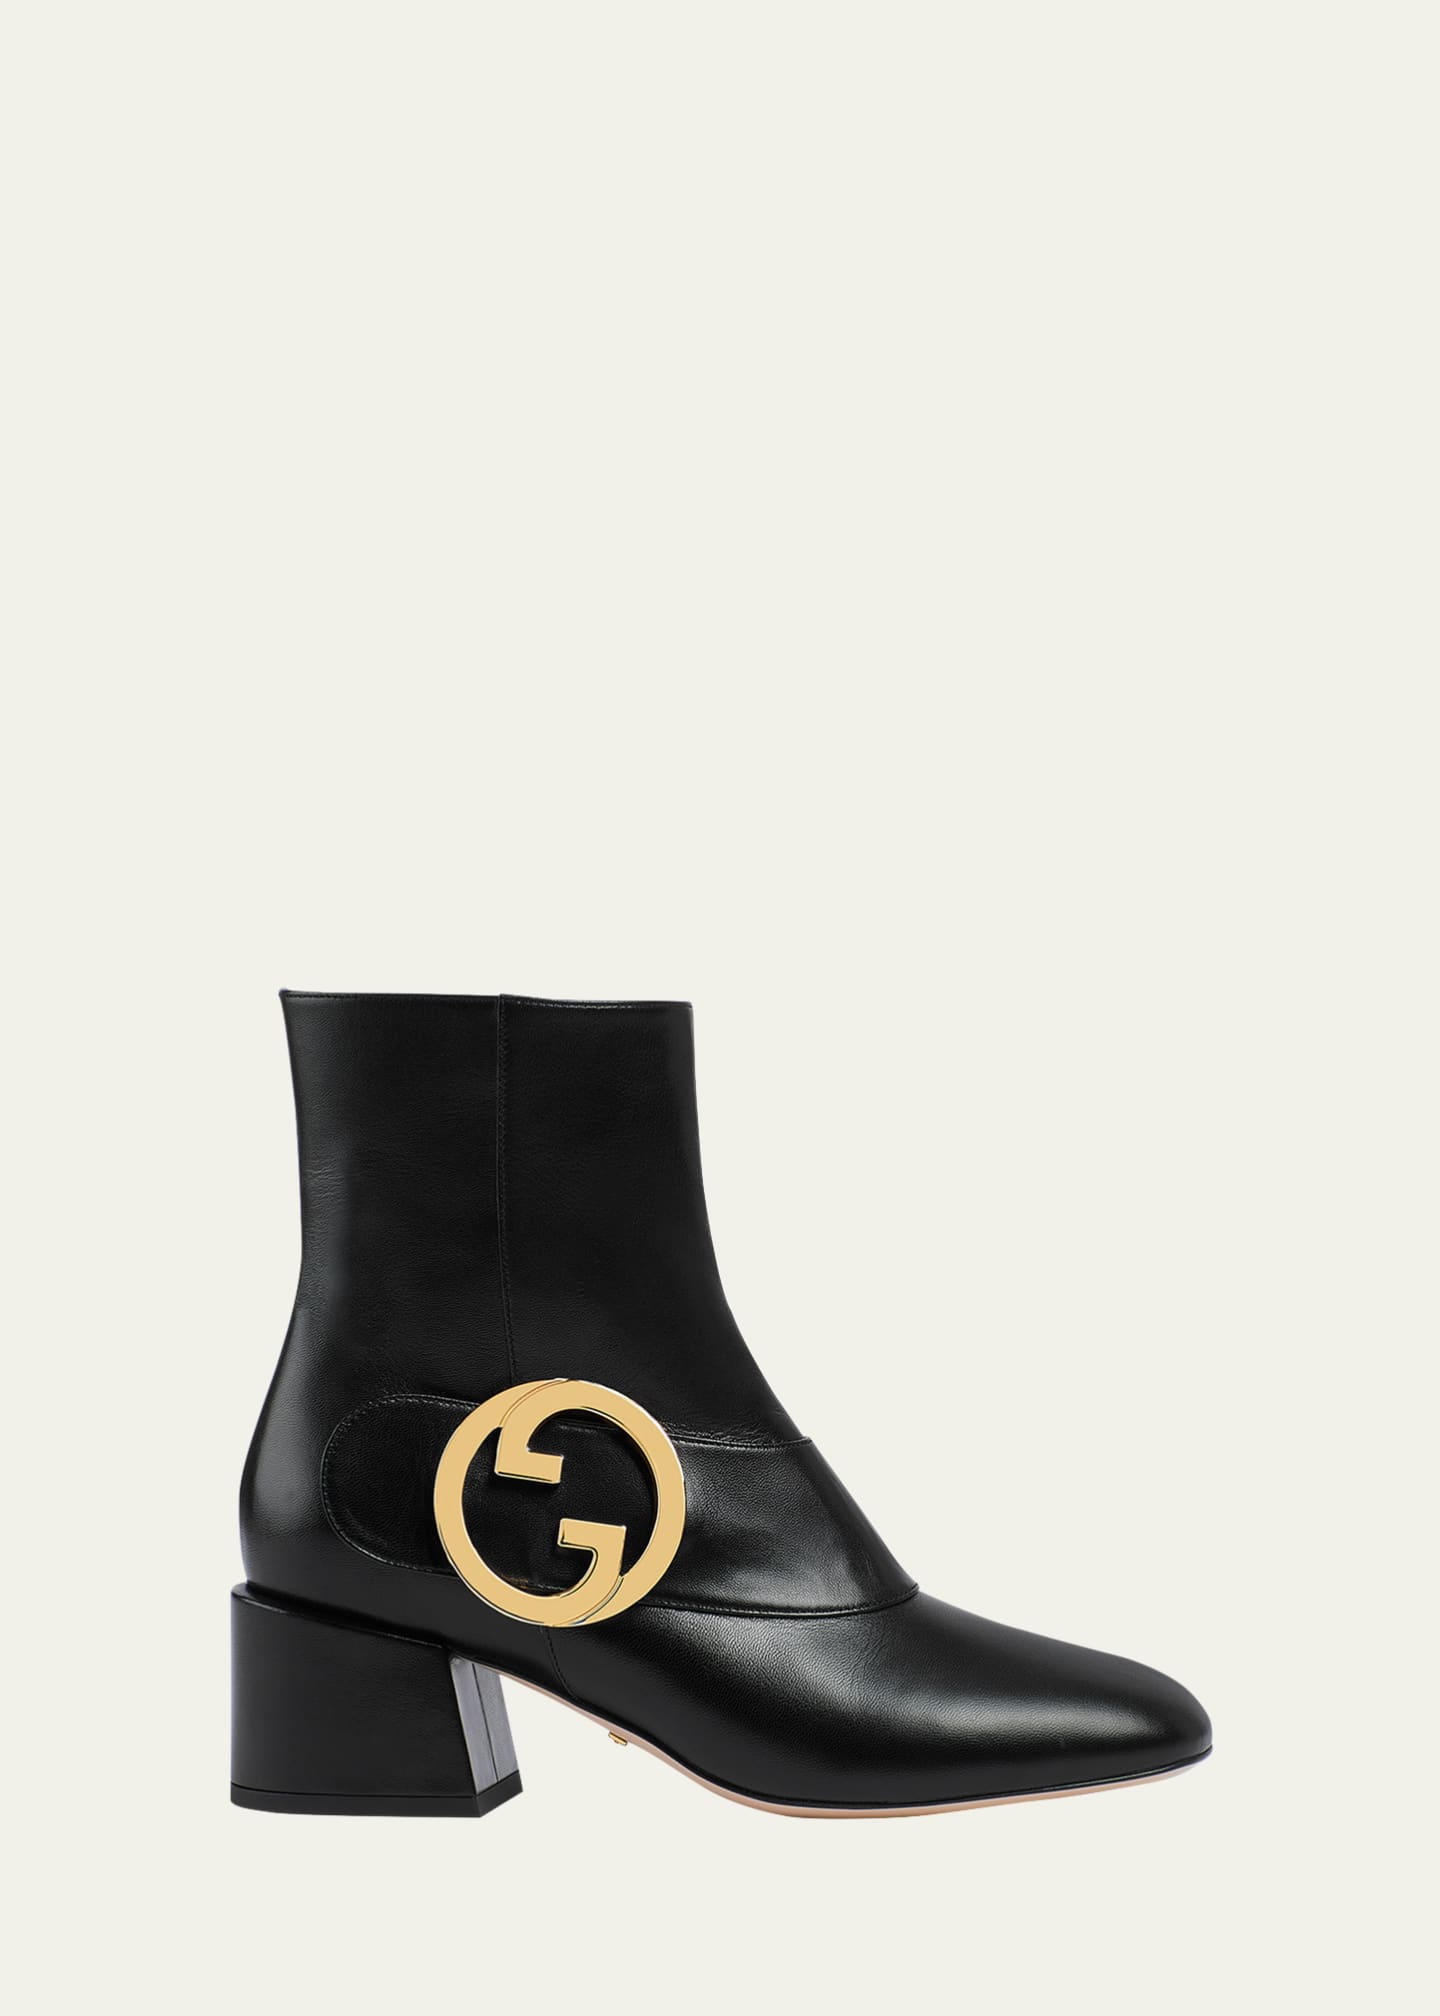 Gucci Blondie Leather Medallion Ankle Boots - Bergdorf Goodman